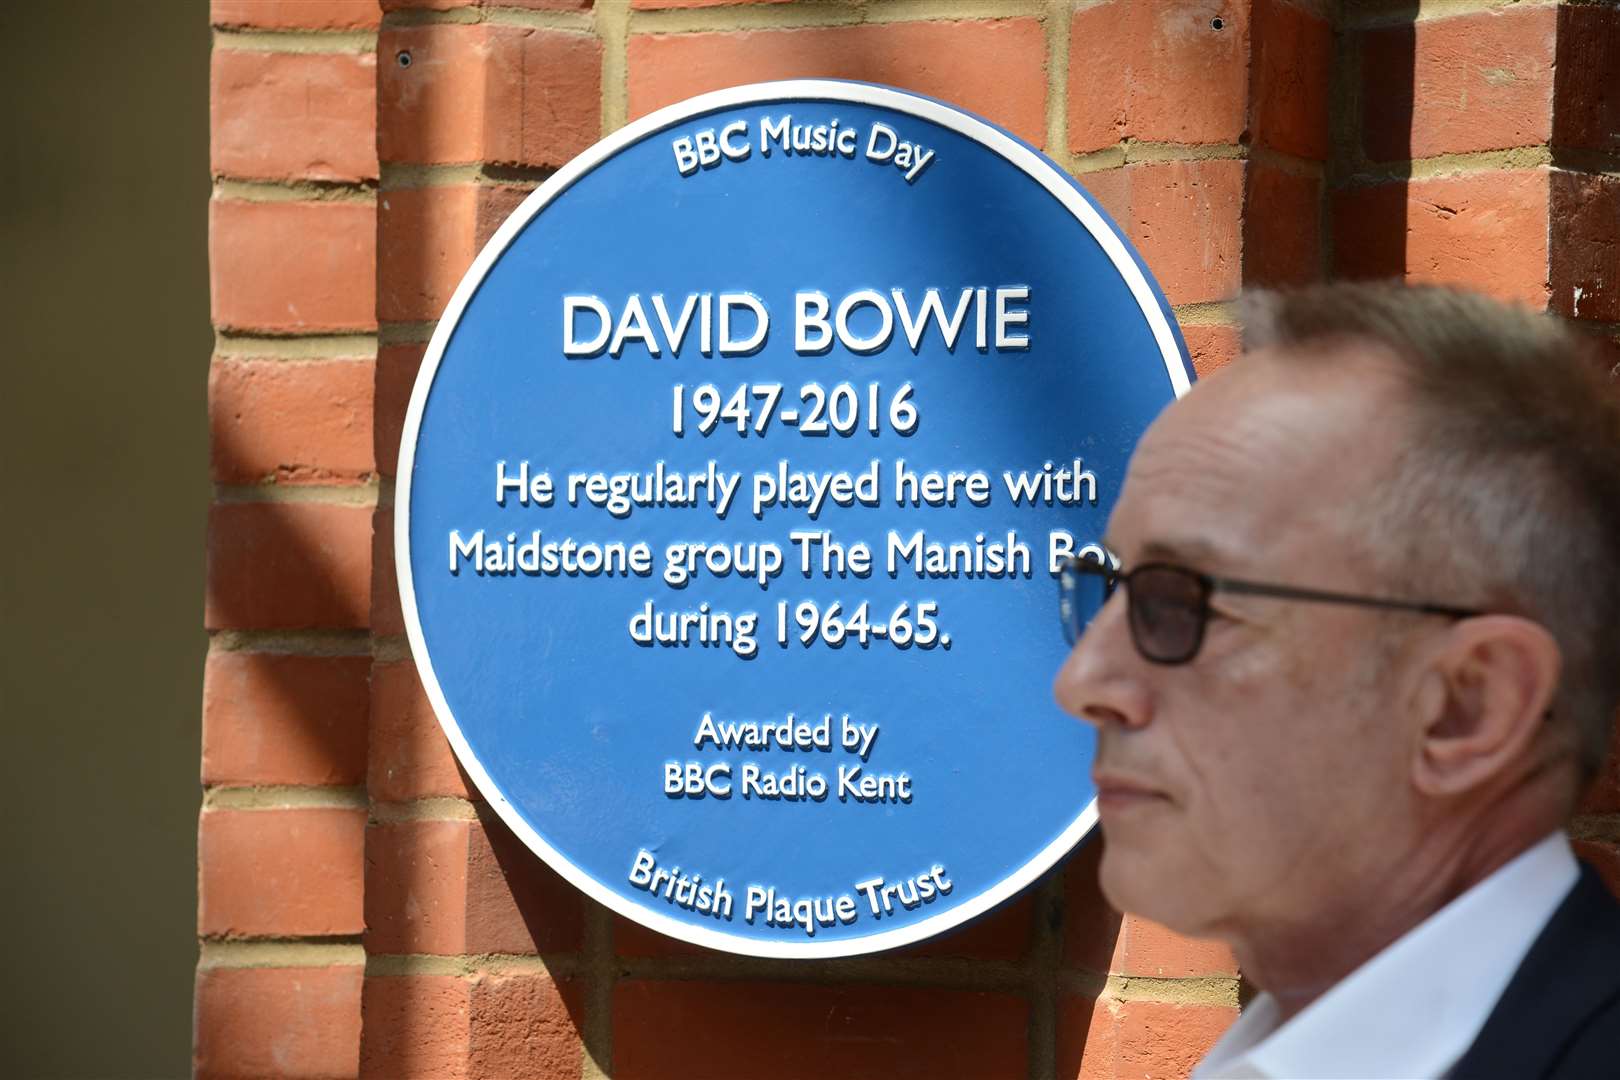 Topper Headon, former drummer with The Clash at the unveiling of the blue plaque to David Bowie in the Royal Star Arcade